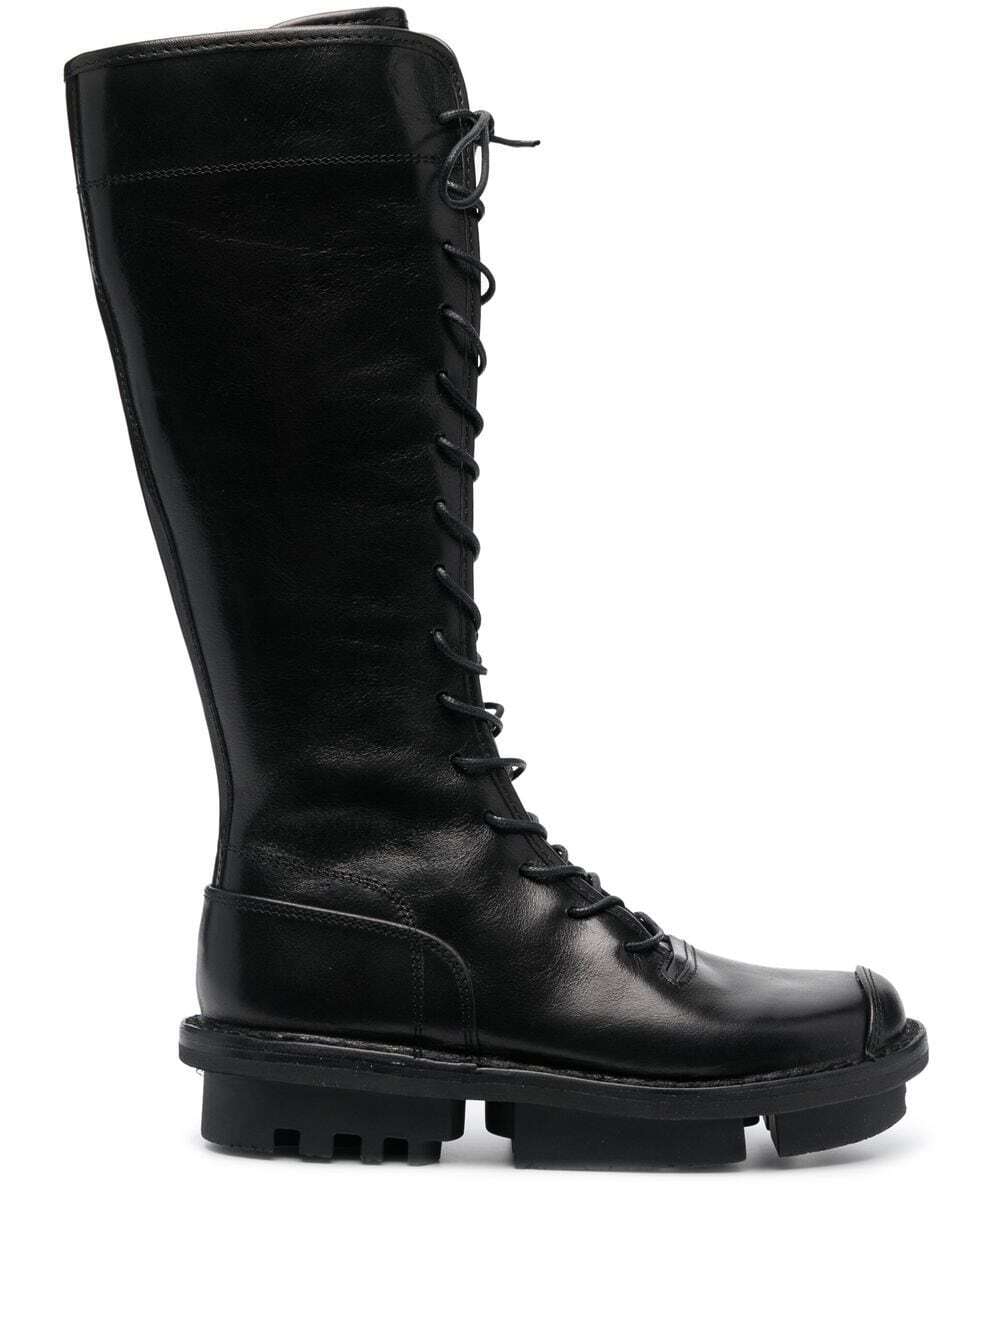 TRIPPEN Unison knee-high leather boots - Black